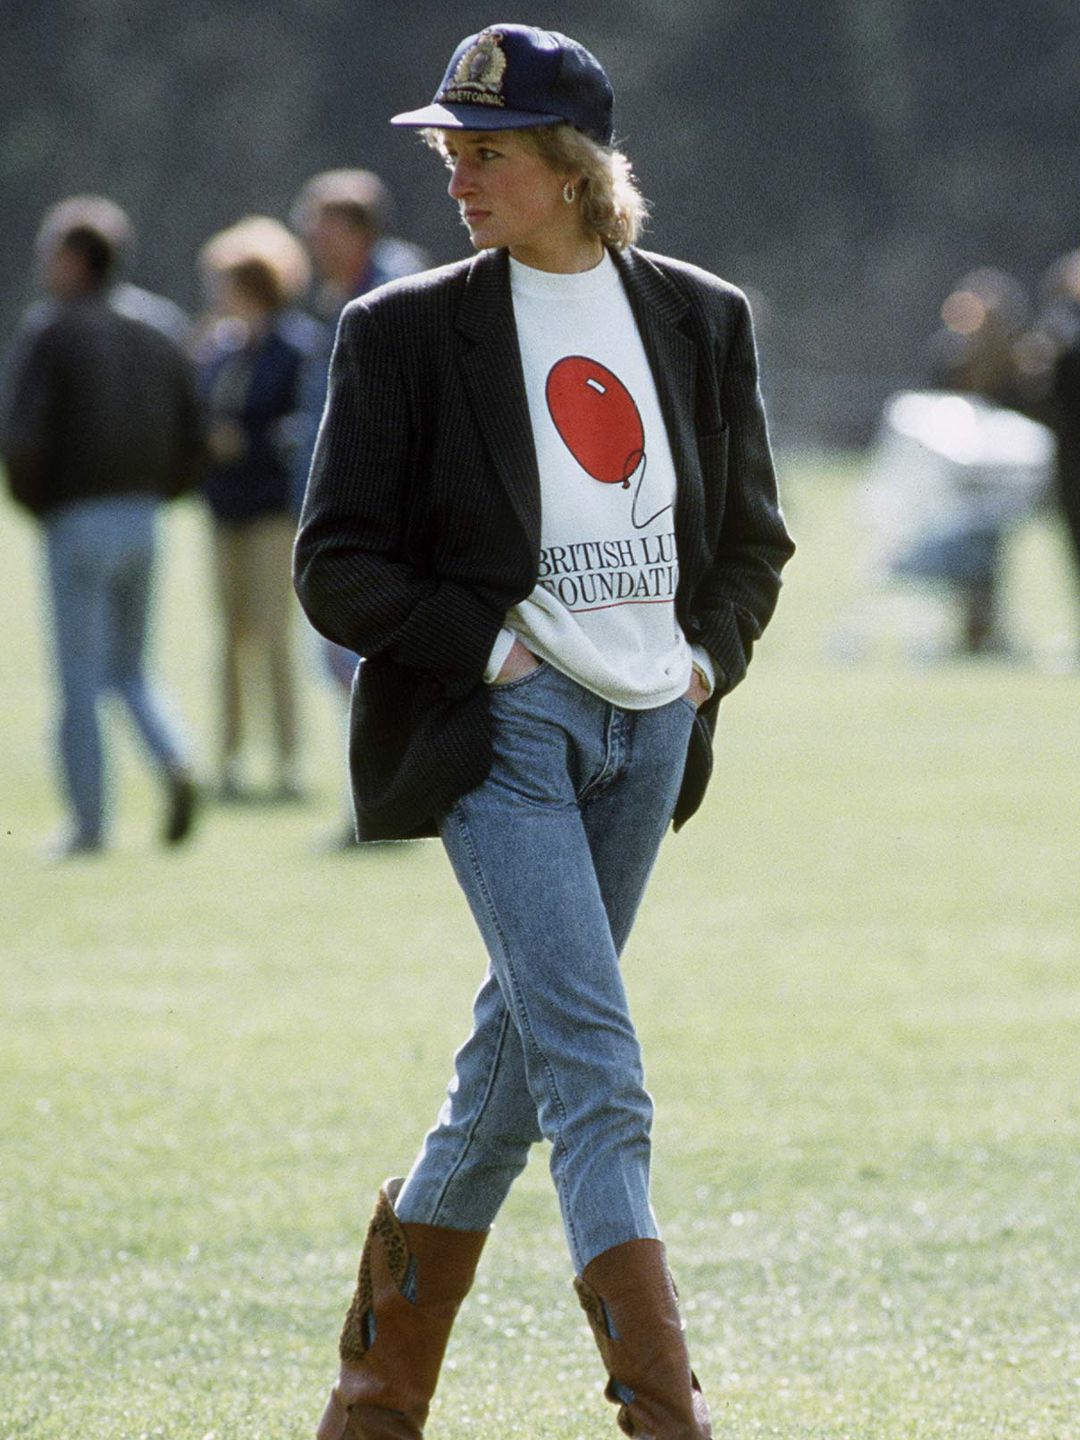 Diana, Princess Of Wales At Guards Polo Club. The Princess was Casually Dressed In A Sweatshirt With The British Lung Foundation Logo On The Front, Jeans, Boots And A Baseball Cap.  